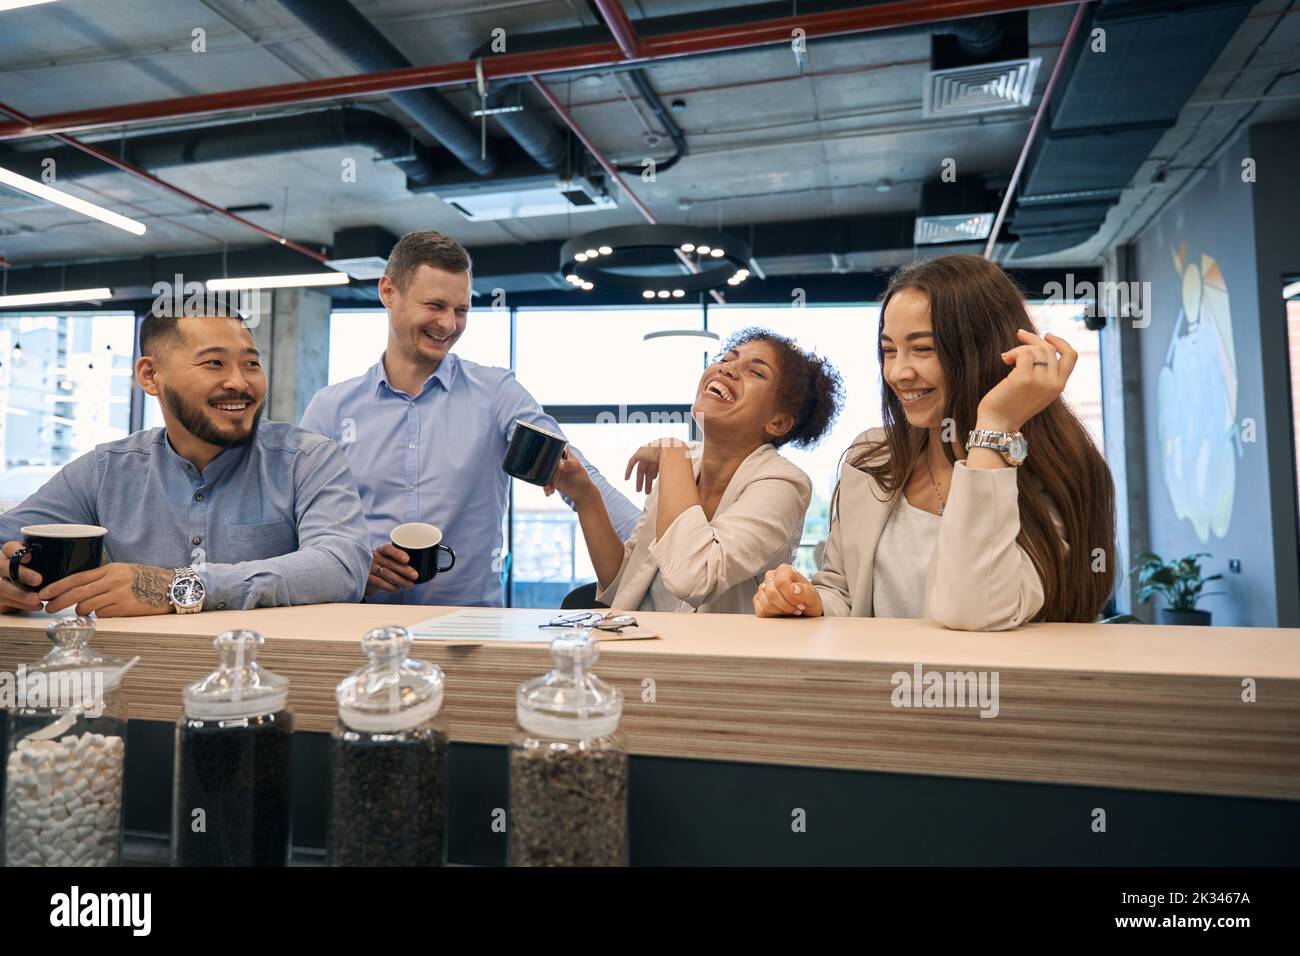 Cheerful company workers spending their coffee break together Stock Photo